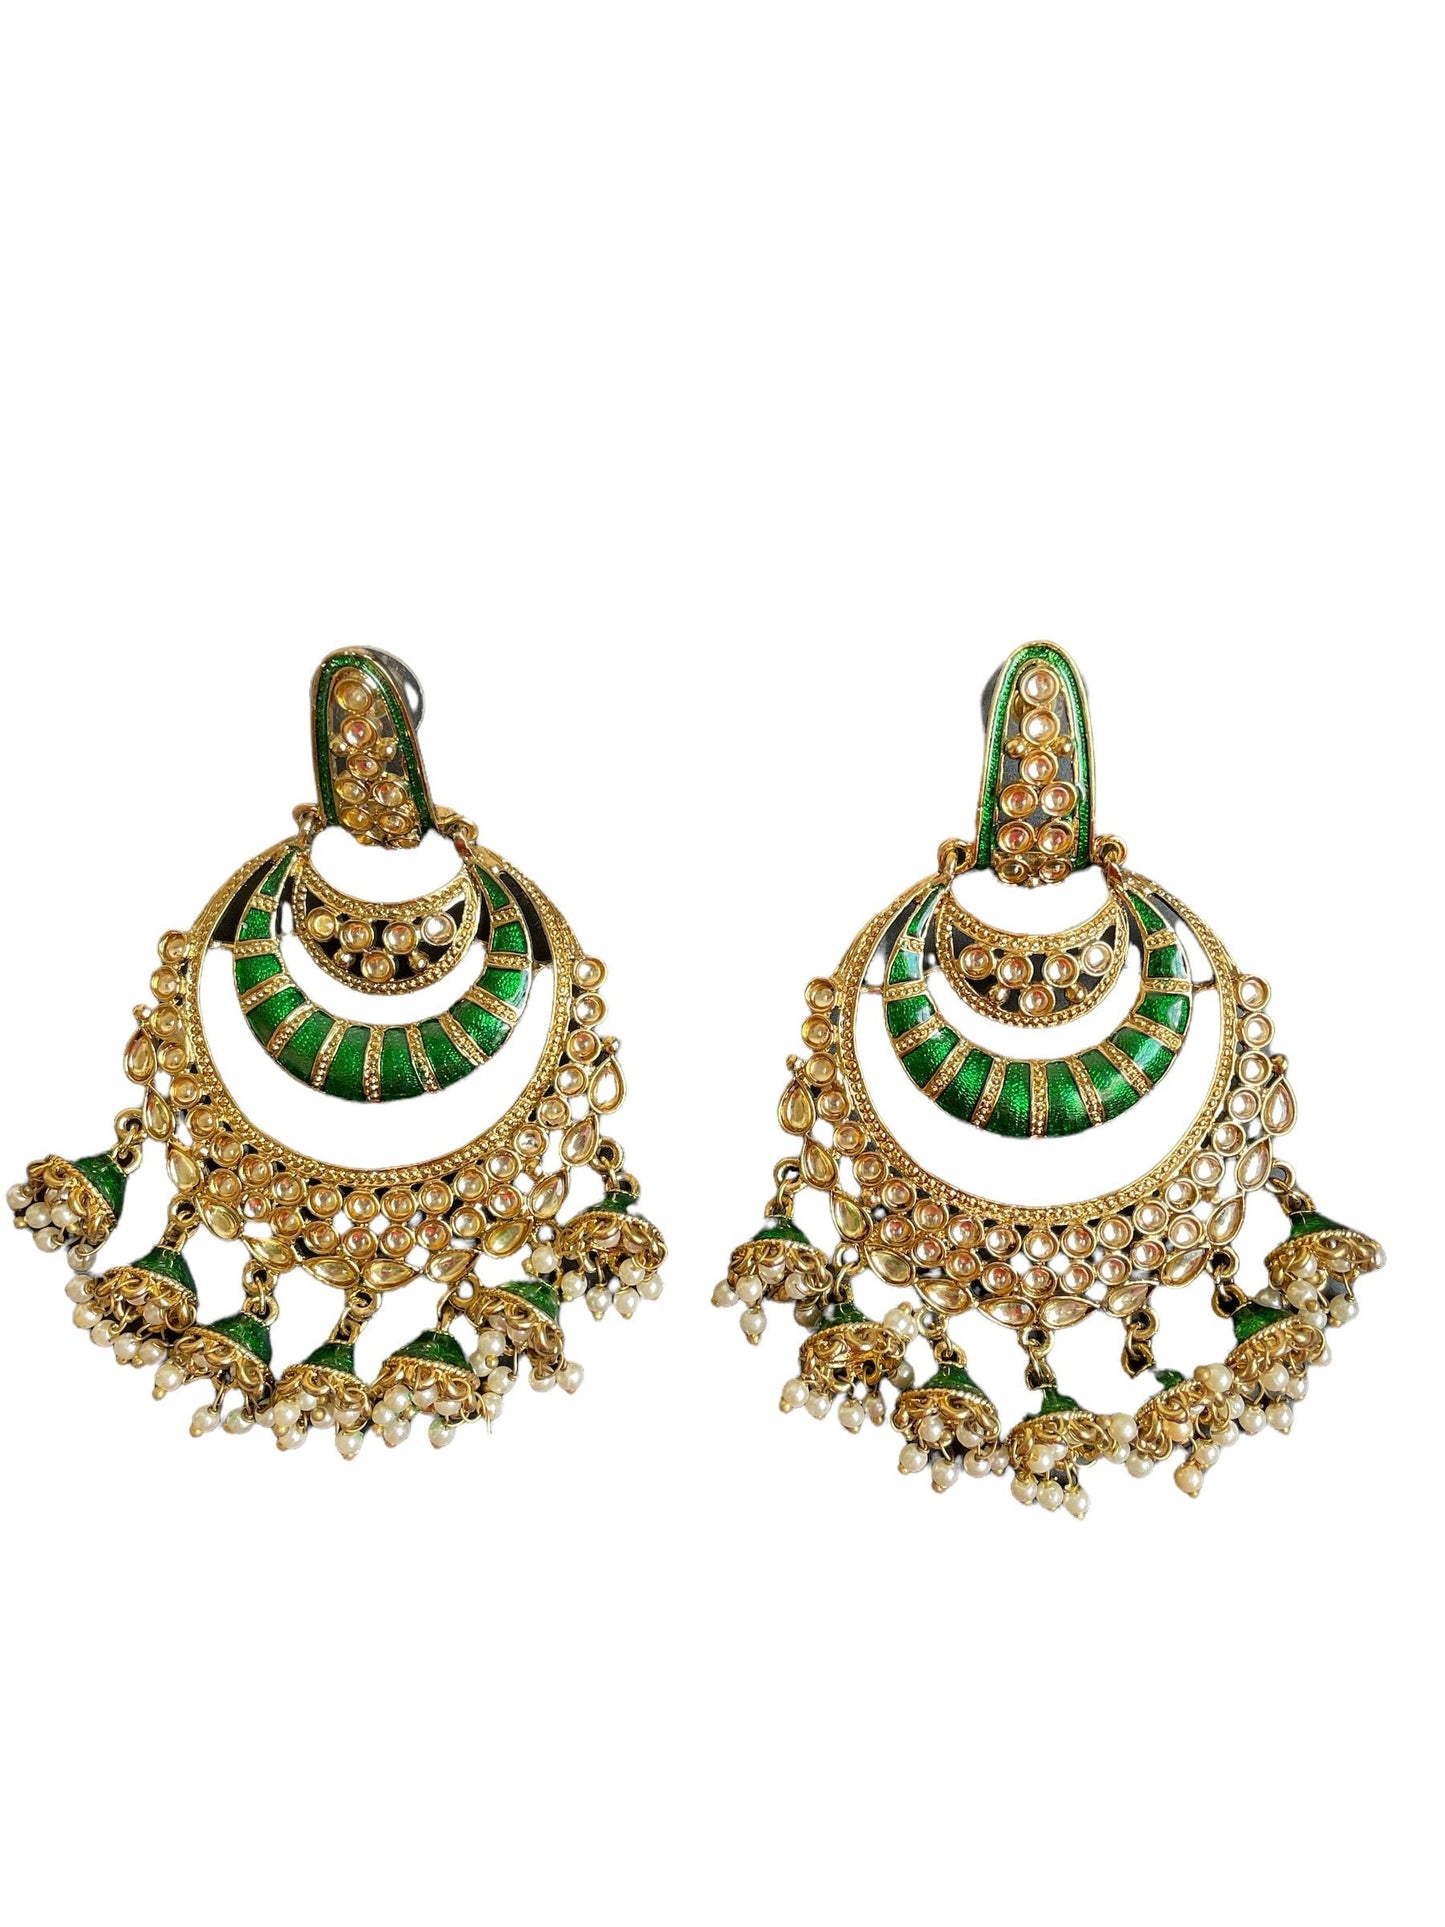 indian jhumka earrings/green pink chandbali/small lightweight indian earrings/gifts for her/kundan gold earrings/traditional indian earrings